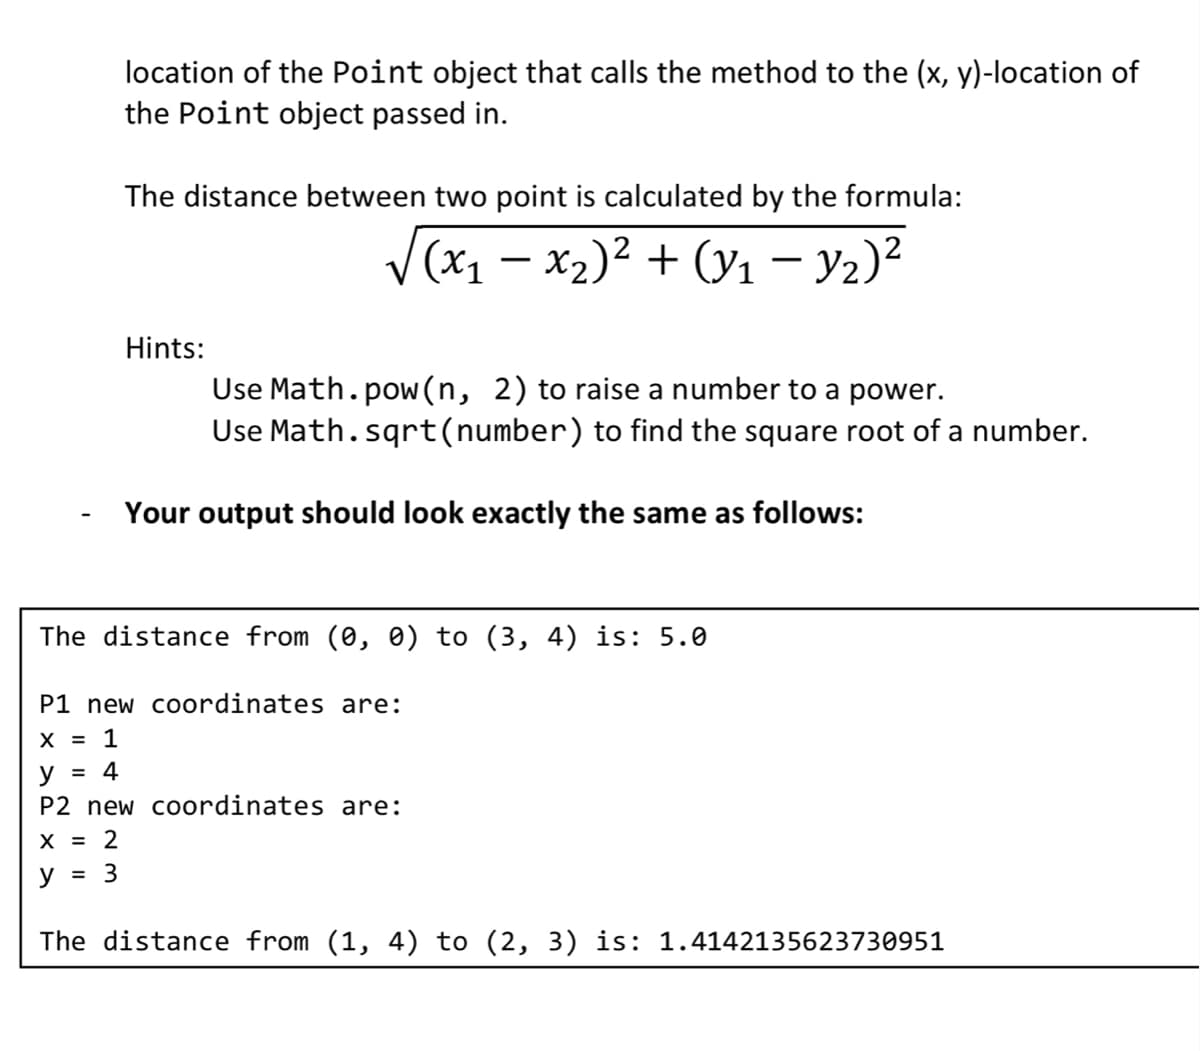 location of the Point object that calls the method to the (x, y)-location of
the Point object passed in.
The distance between two point is calculated by the formula:
√(x₁ - x₂)² + (y₁ - y₂)²
=
Hints:
Use Math.pow(n, 2) to raise a number to a power.
Use Math.sqrt(number) to find the square root of a number.
Your output should look exactly the same as follows:
The distance from (0, 0) to (3, 4) is: 5.0
P1 new coordinates are:
X = 1
y = 4
P2 new coordinates are:
X = 2
y
3
The distance from (1, 4) to (2, 3) is: 1.4142135623730951